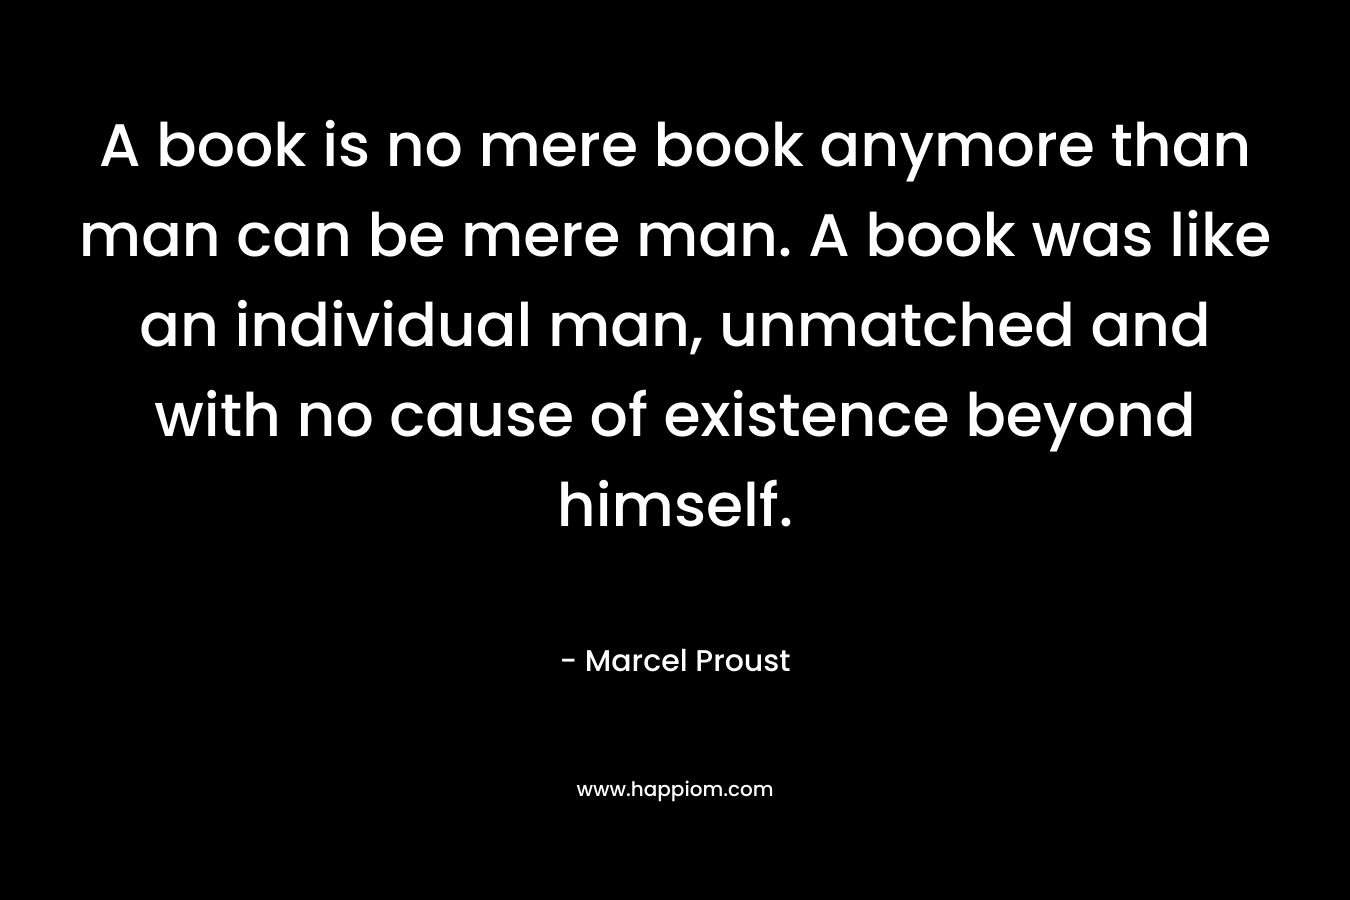 A book is no mere book anymore than man can be mere man. A book was like an individual man, unmatched and with no cause of existence beyond himself. – Marcel Proust